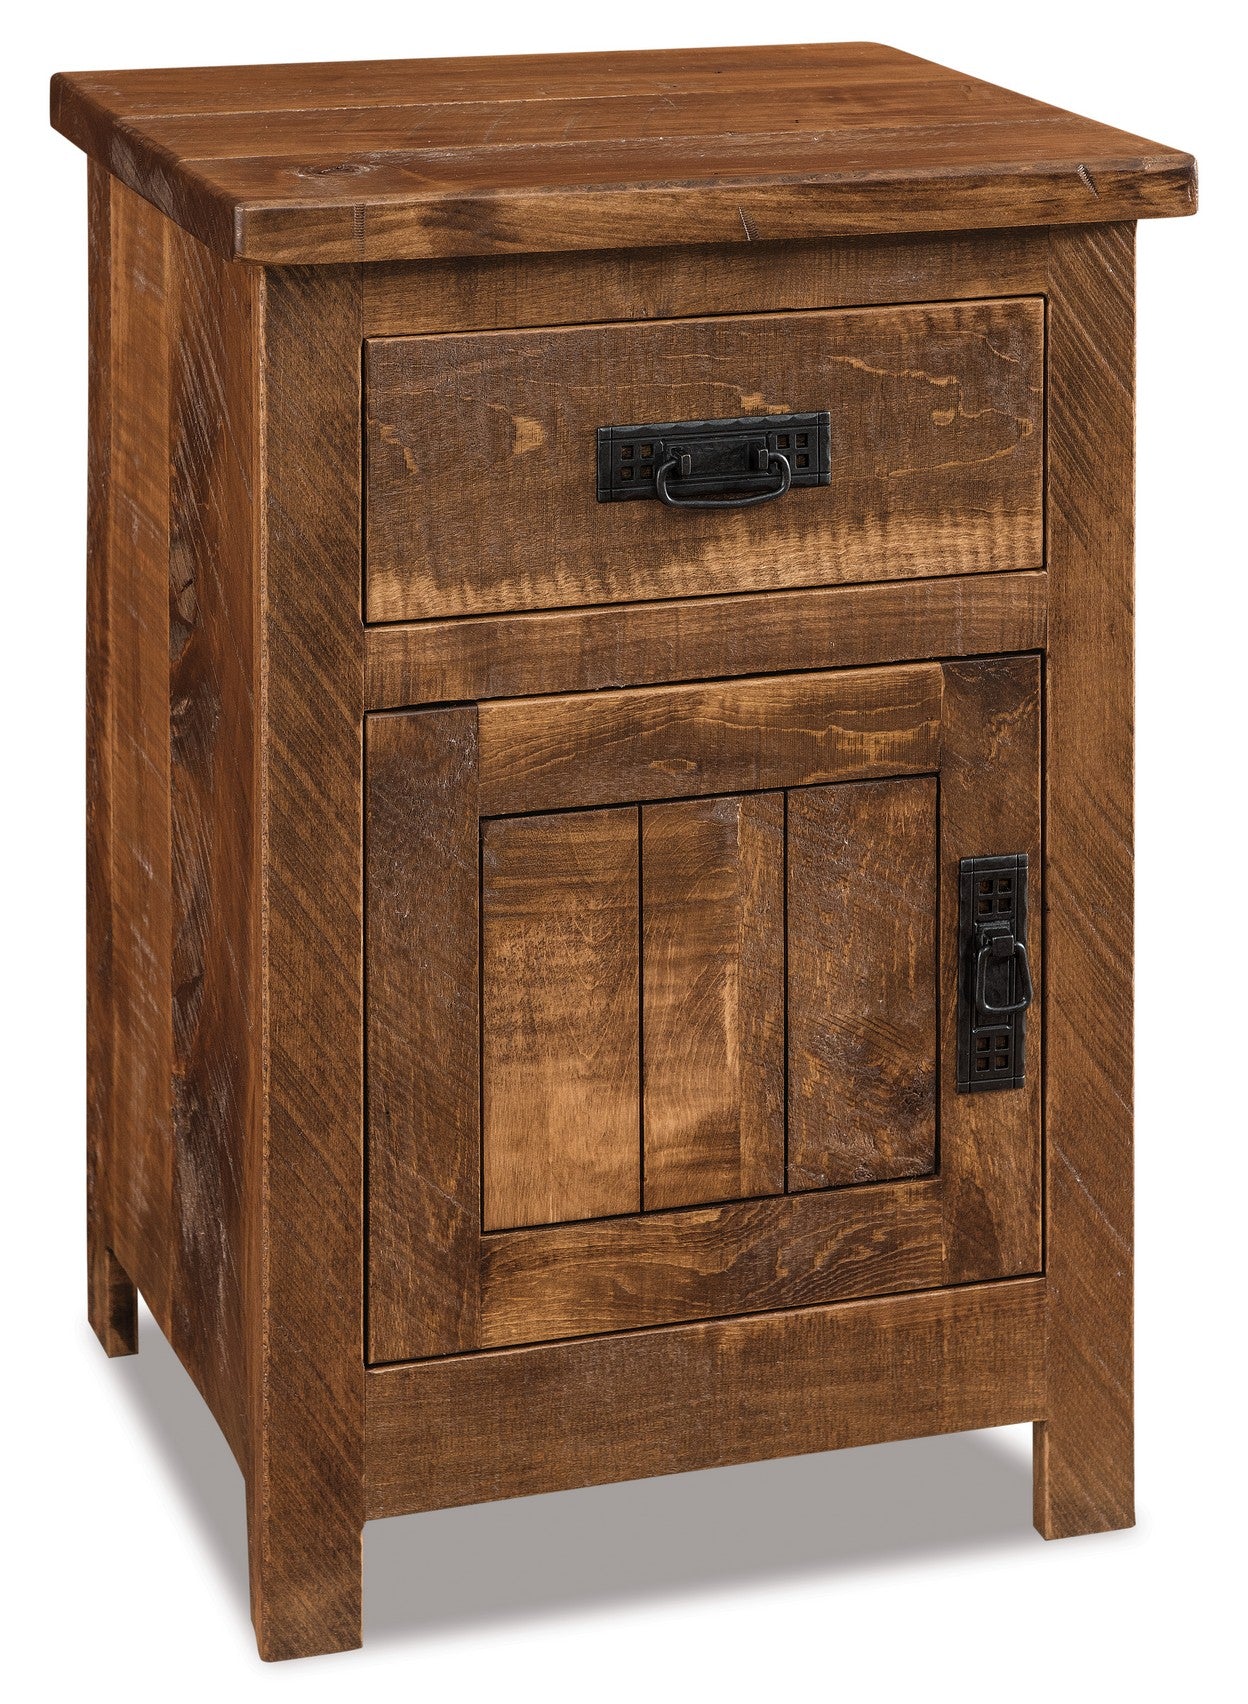 Amish Dumont Rustic Small Nightstands